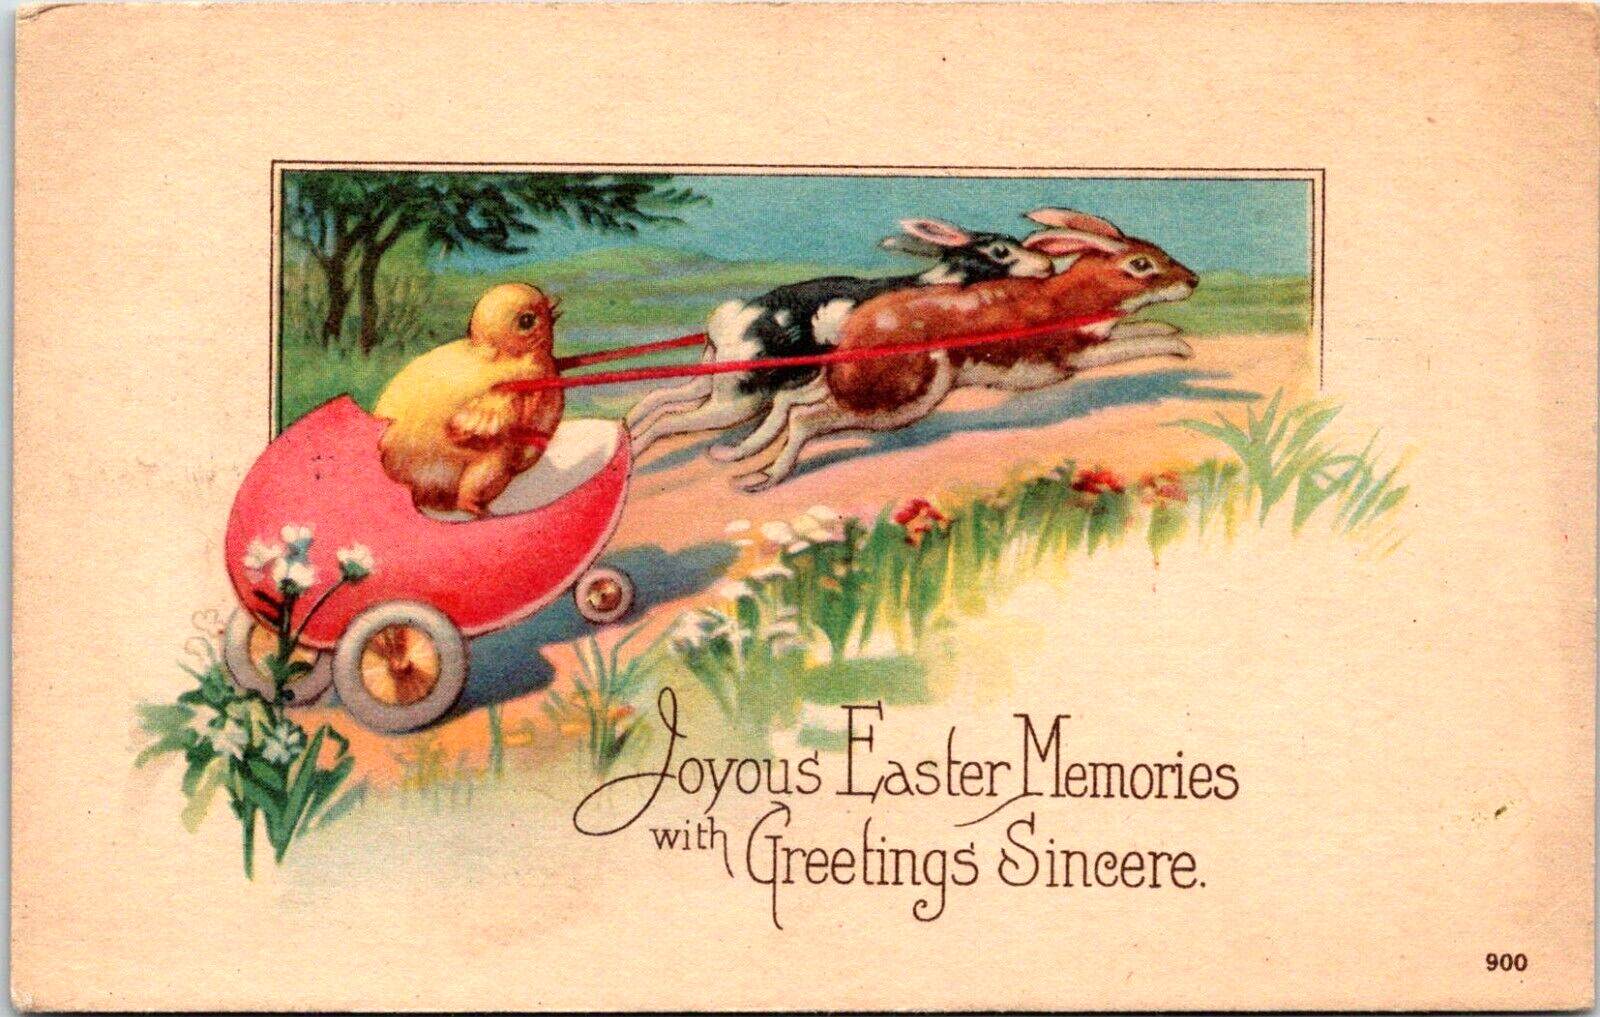 1925 Easter Greetings Sincere Postcard  Bunnies Pull Chick in Pink Egg Wagon